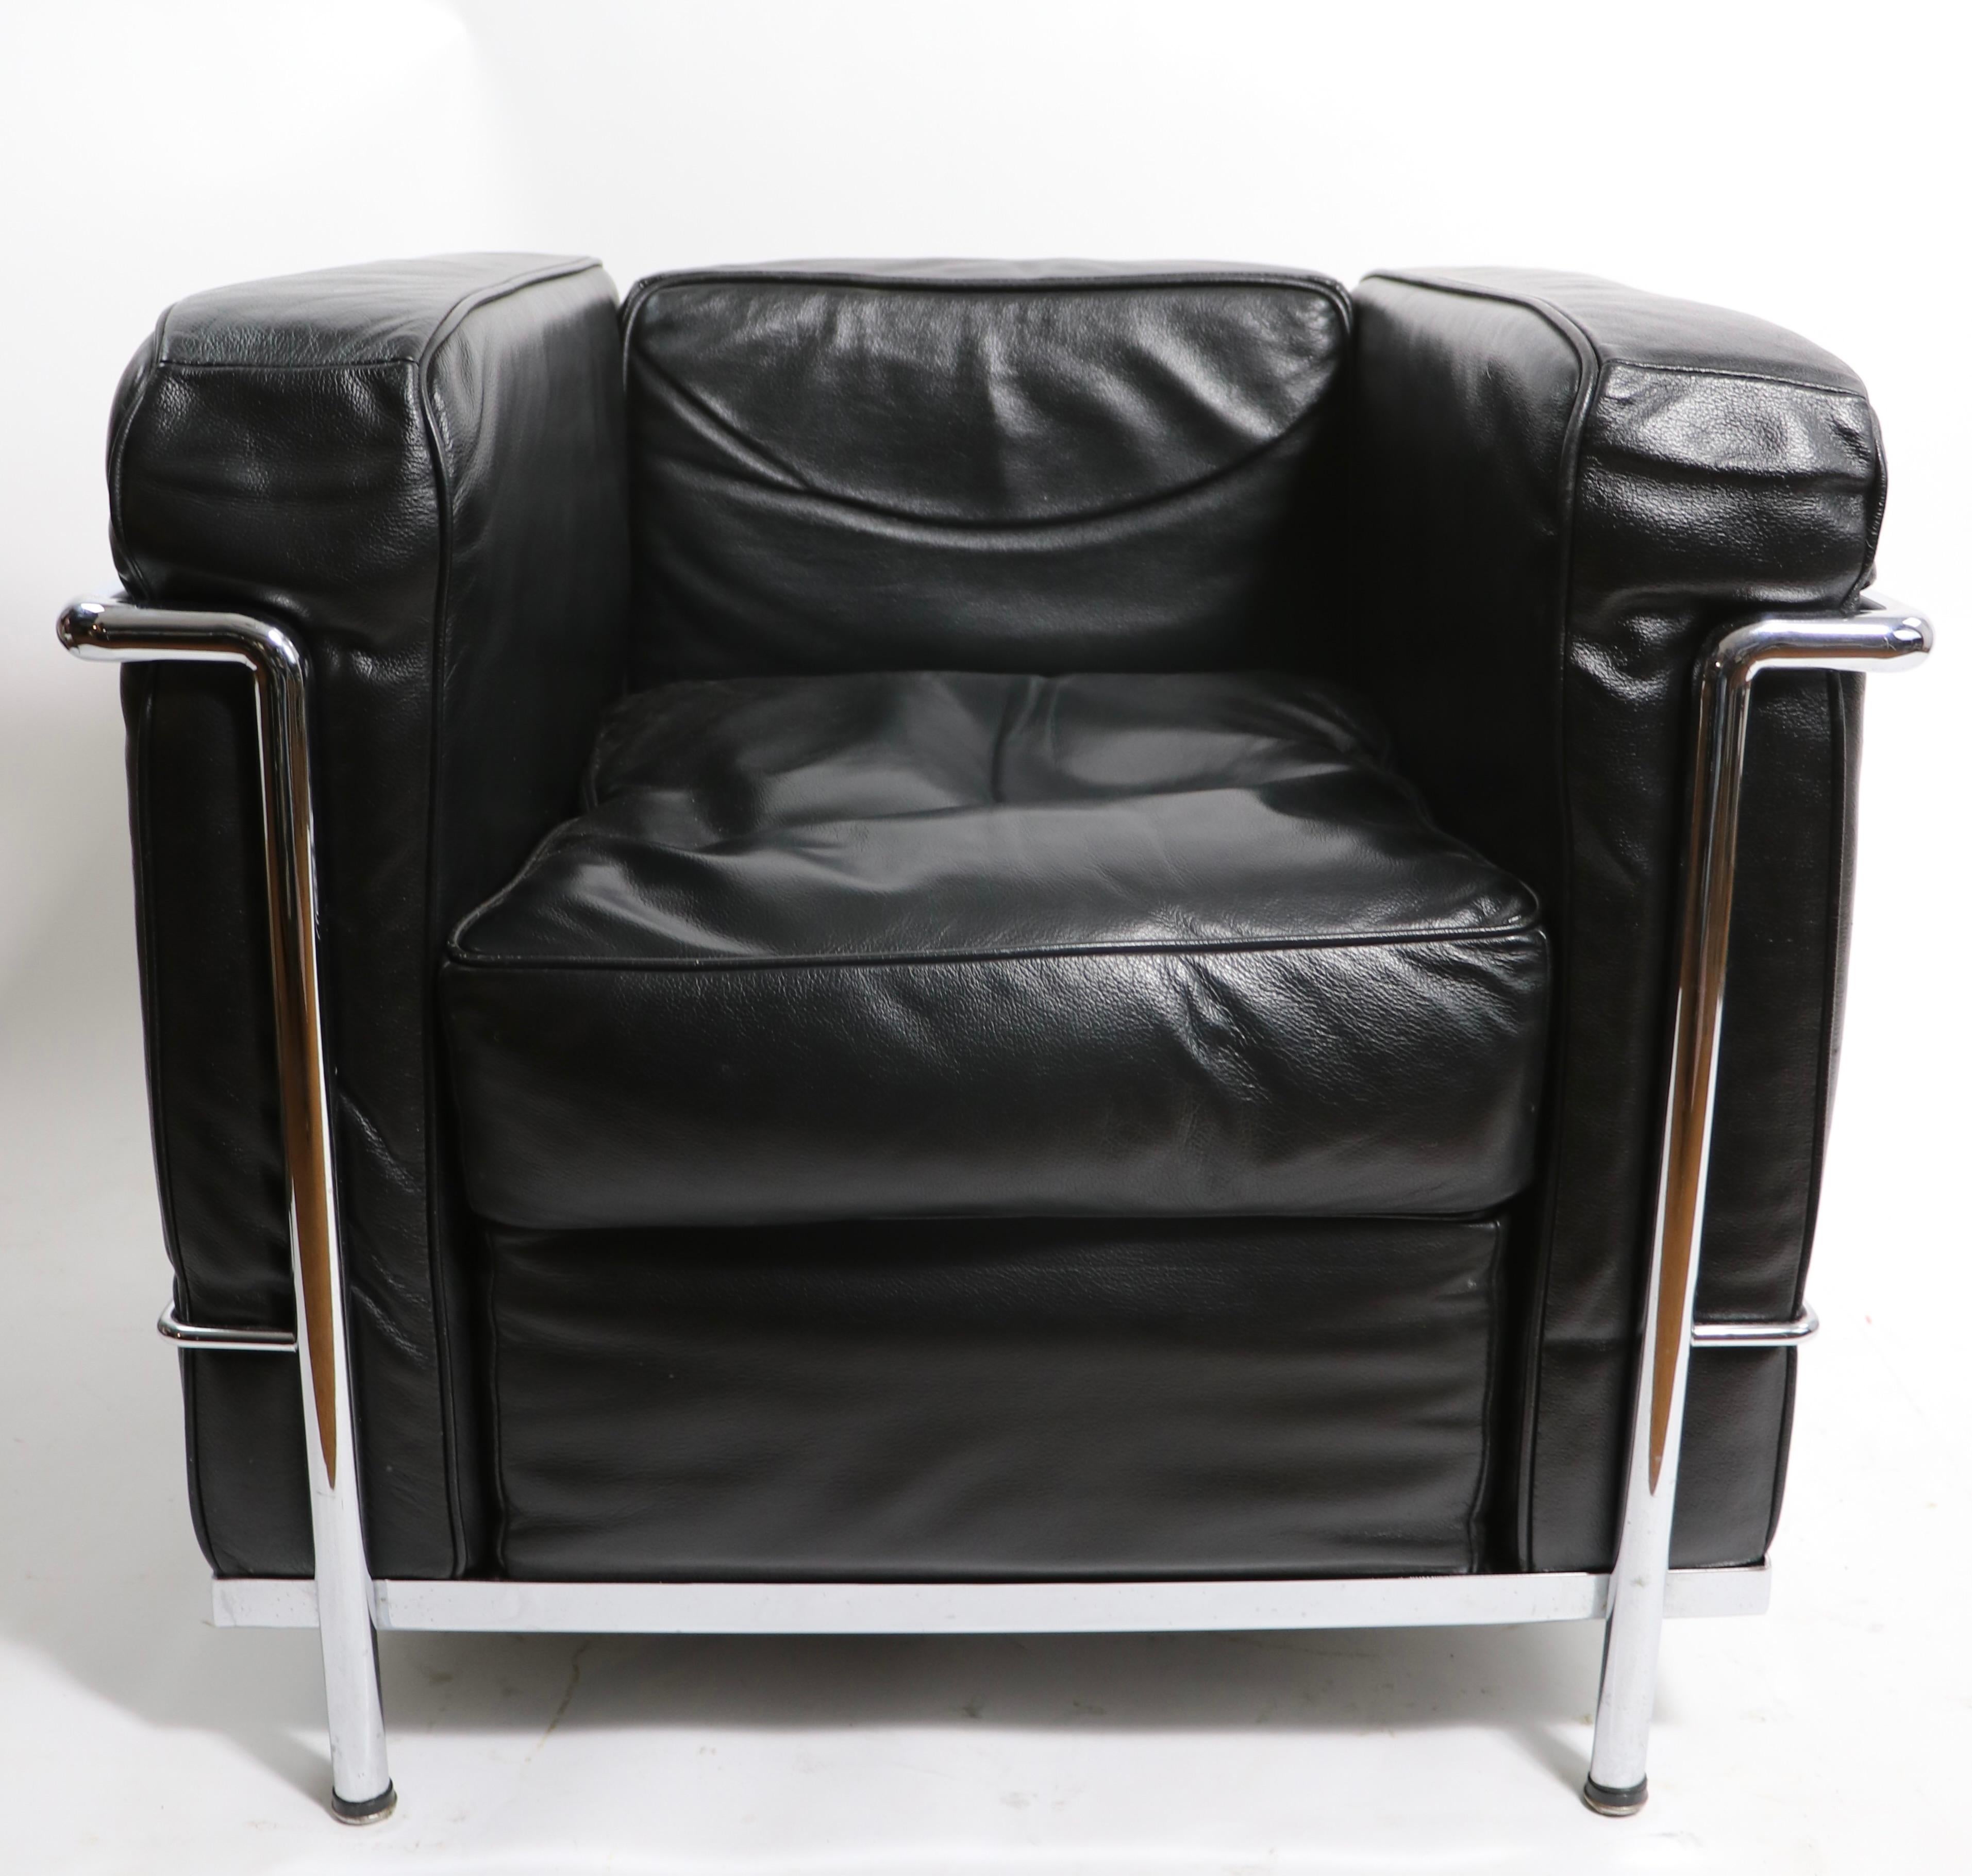 Exquisite pair of LC2 Petite Modele armchairs in bright chrome with black leather cushions. These chairs are vintage 1970's, probably made in Italy, unsigned. Both are in very fine, original condition, clean and ready to use. Iconic Bauhaus design